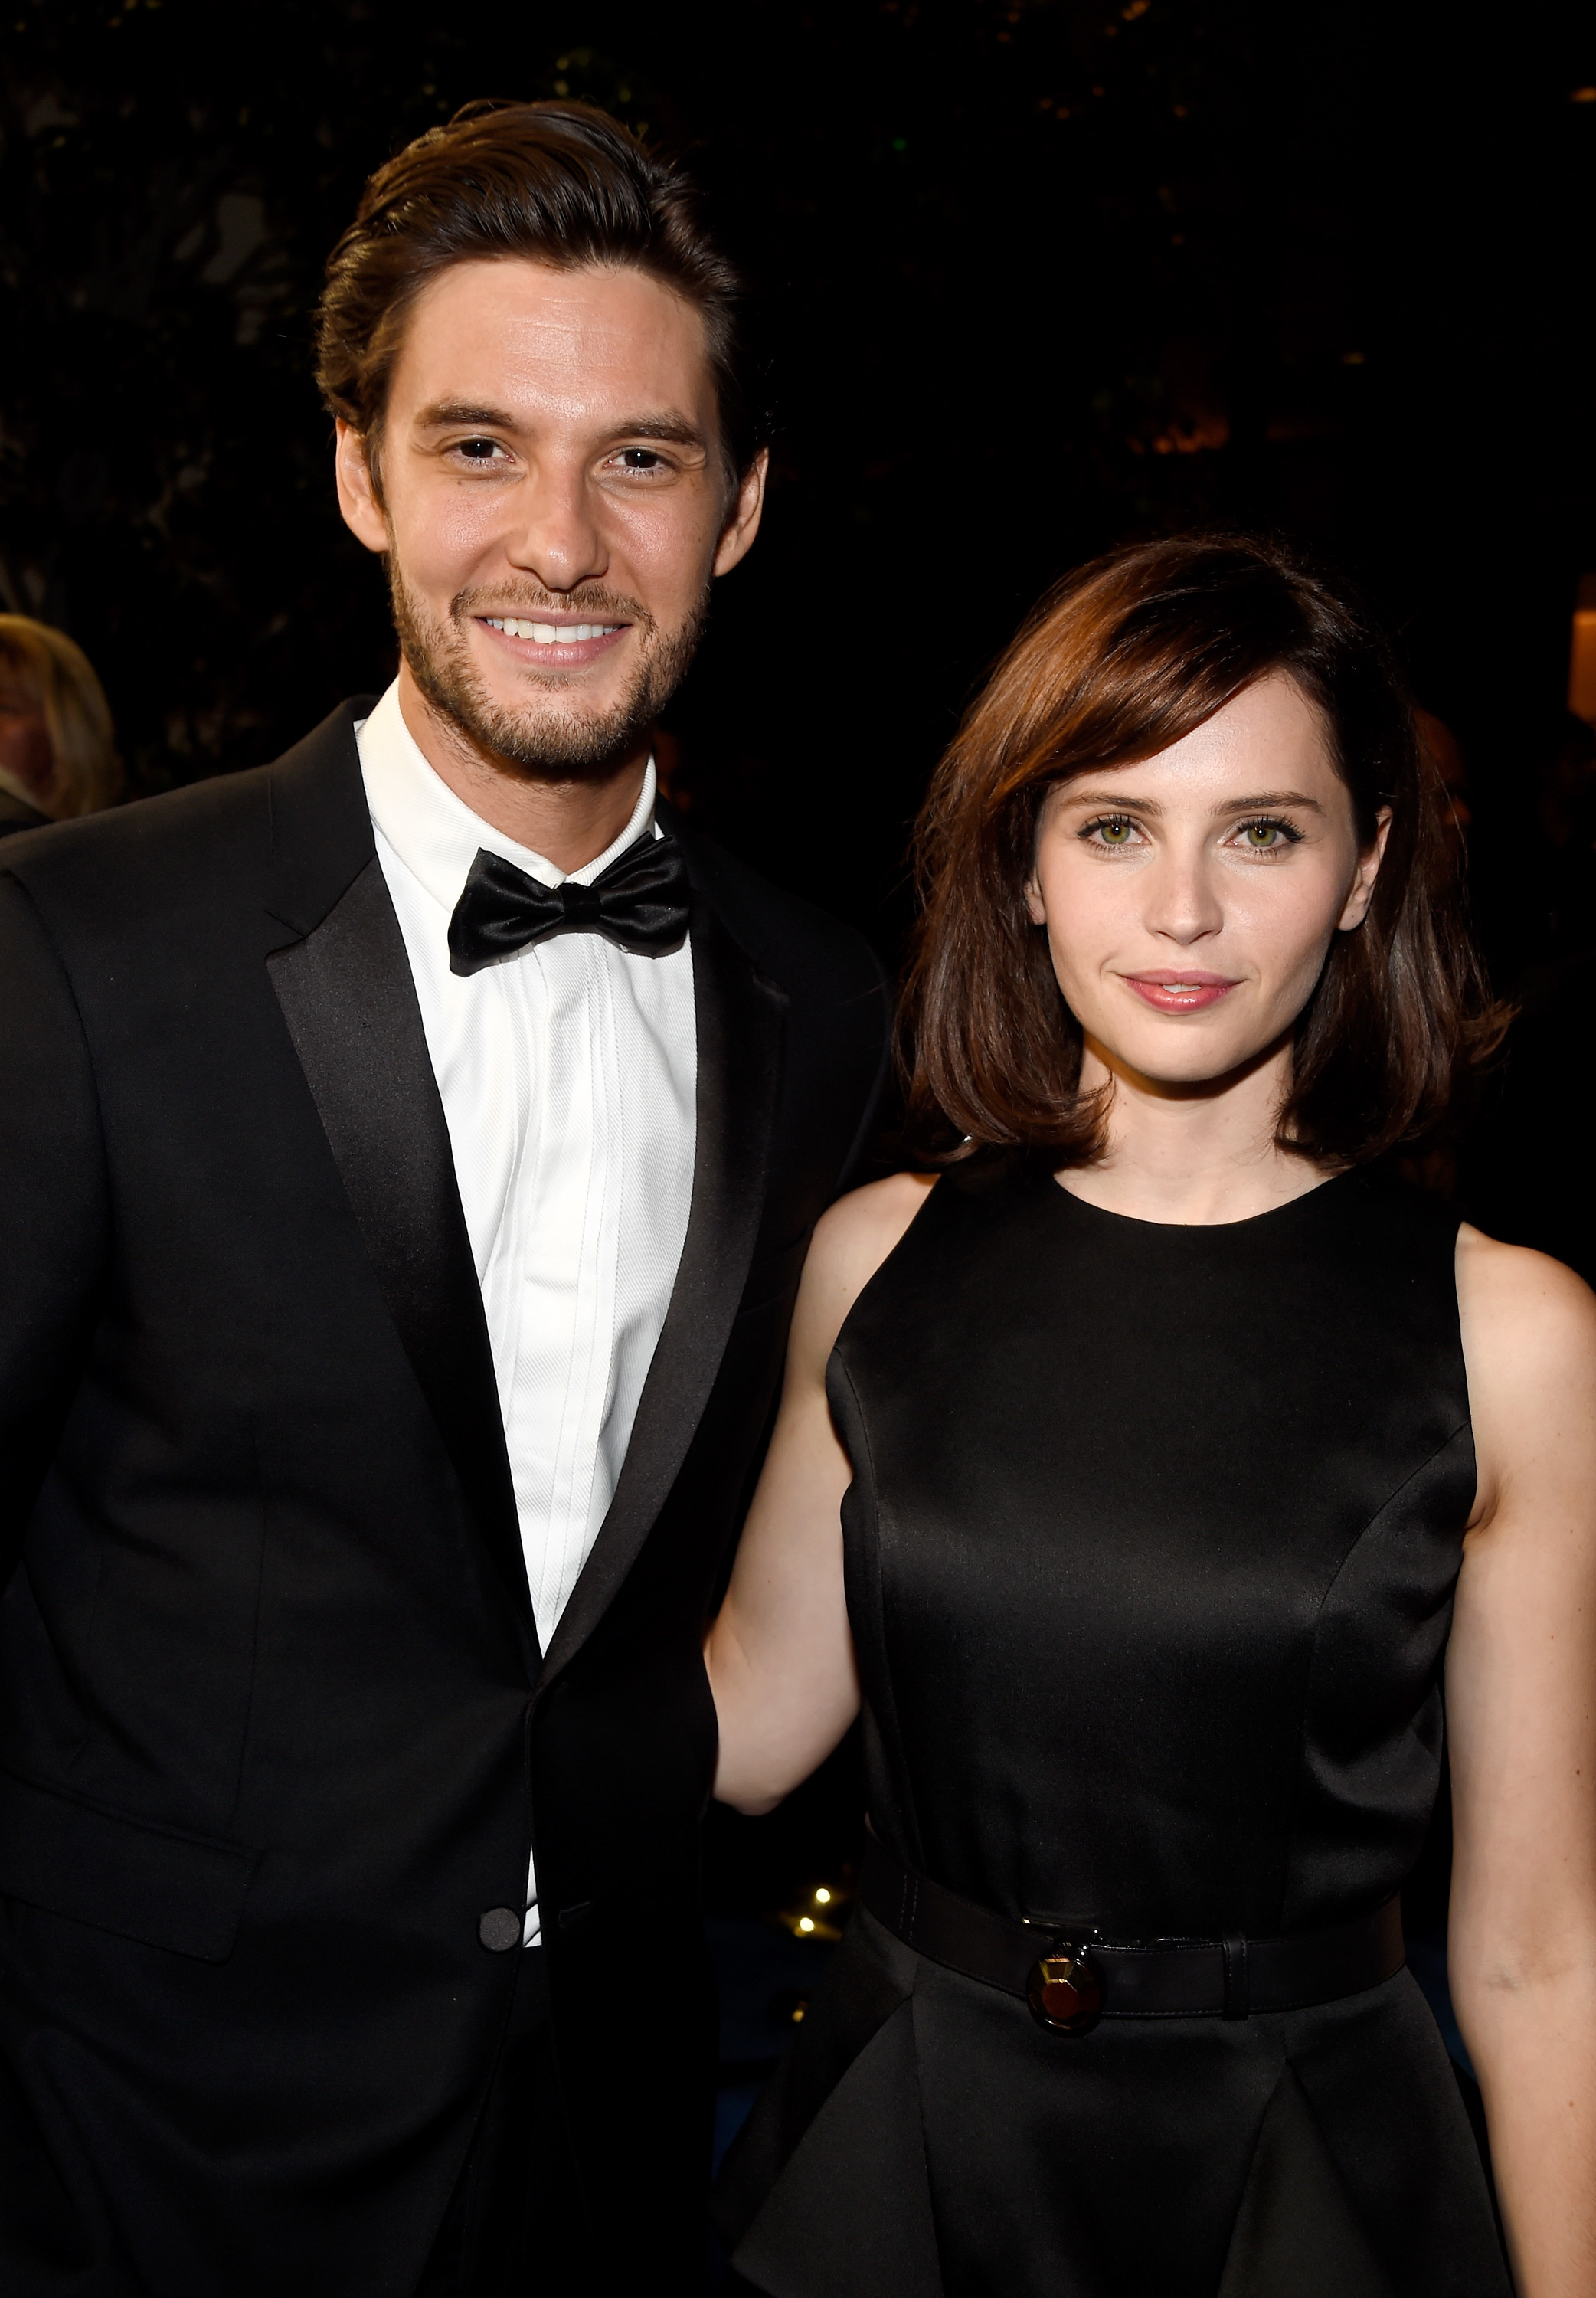 Ben Barnes and Felicity Jones attend the BAFTA Los Angeles Jaguar Britannia Awards at The Beverly Hilton Hotel on October 30, 2014, in Beverly Hills, California. | Source: Getty Images